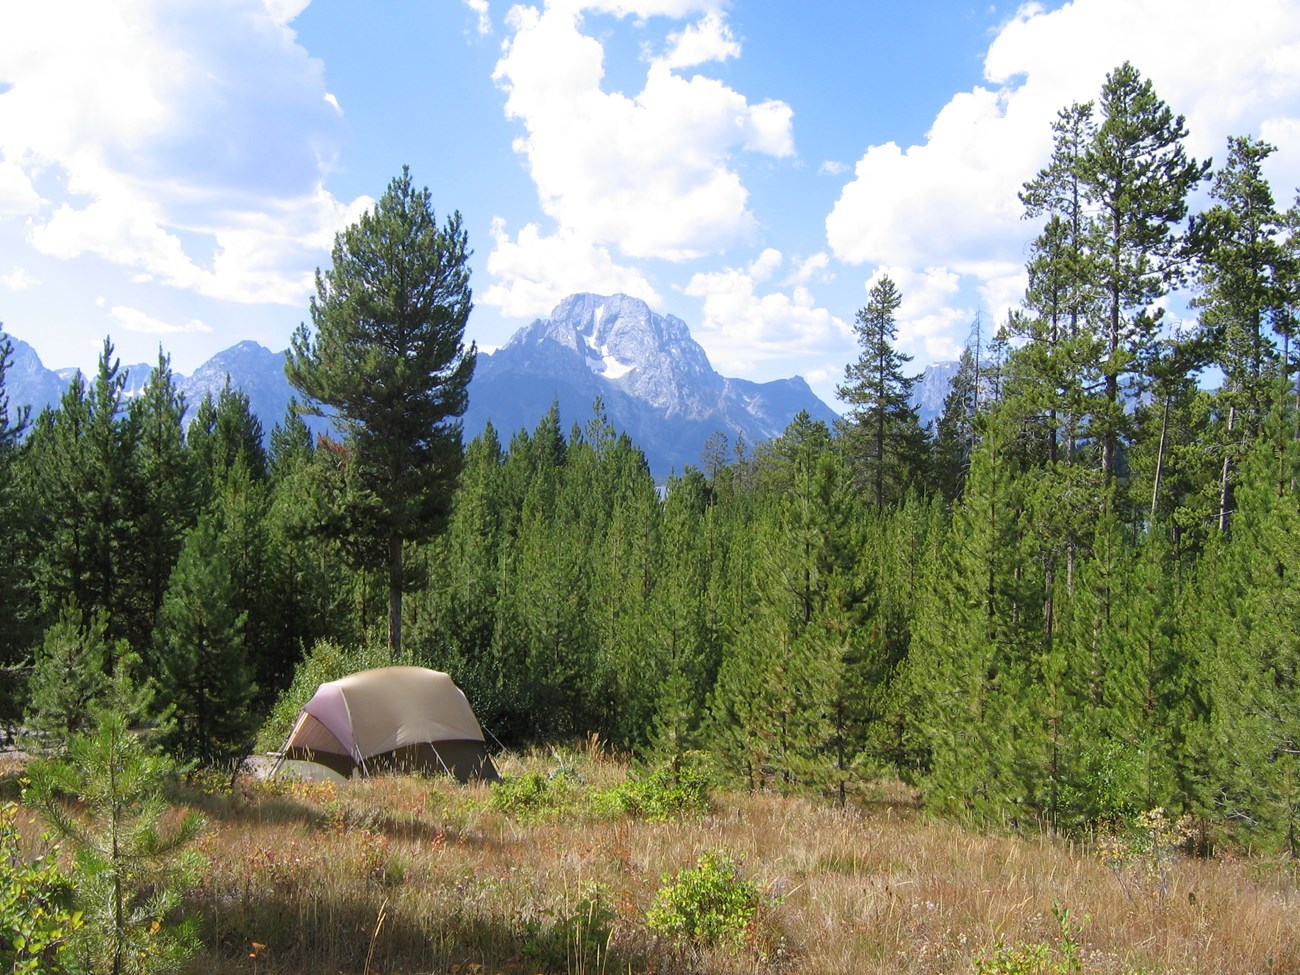 A tent in tall grass with mountains in the background.